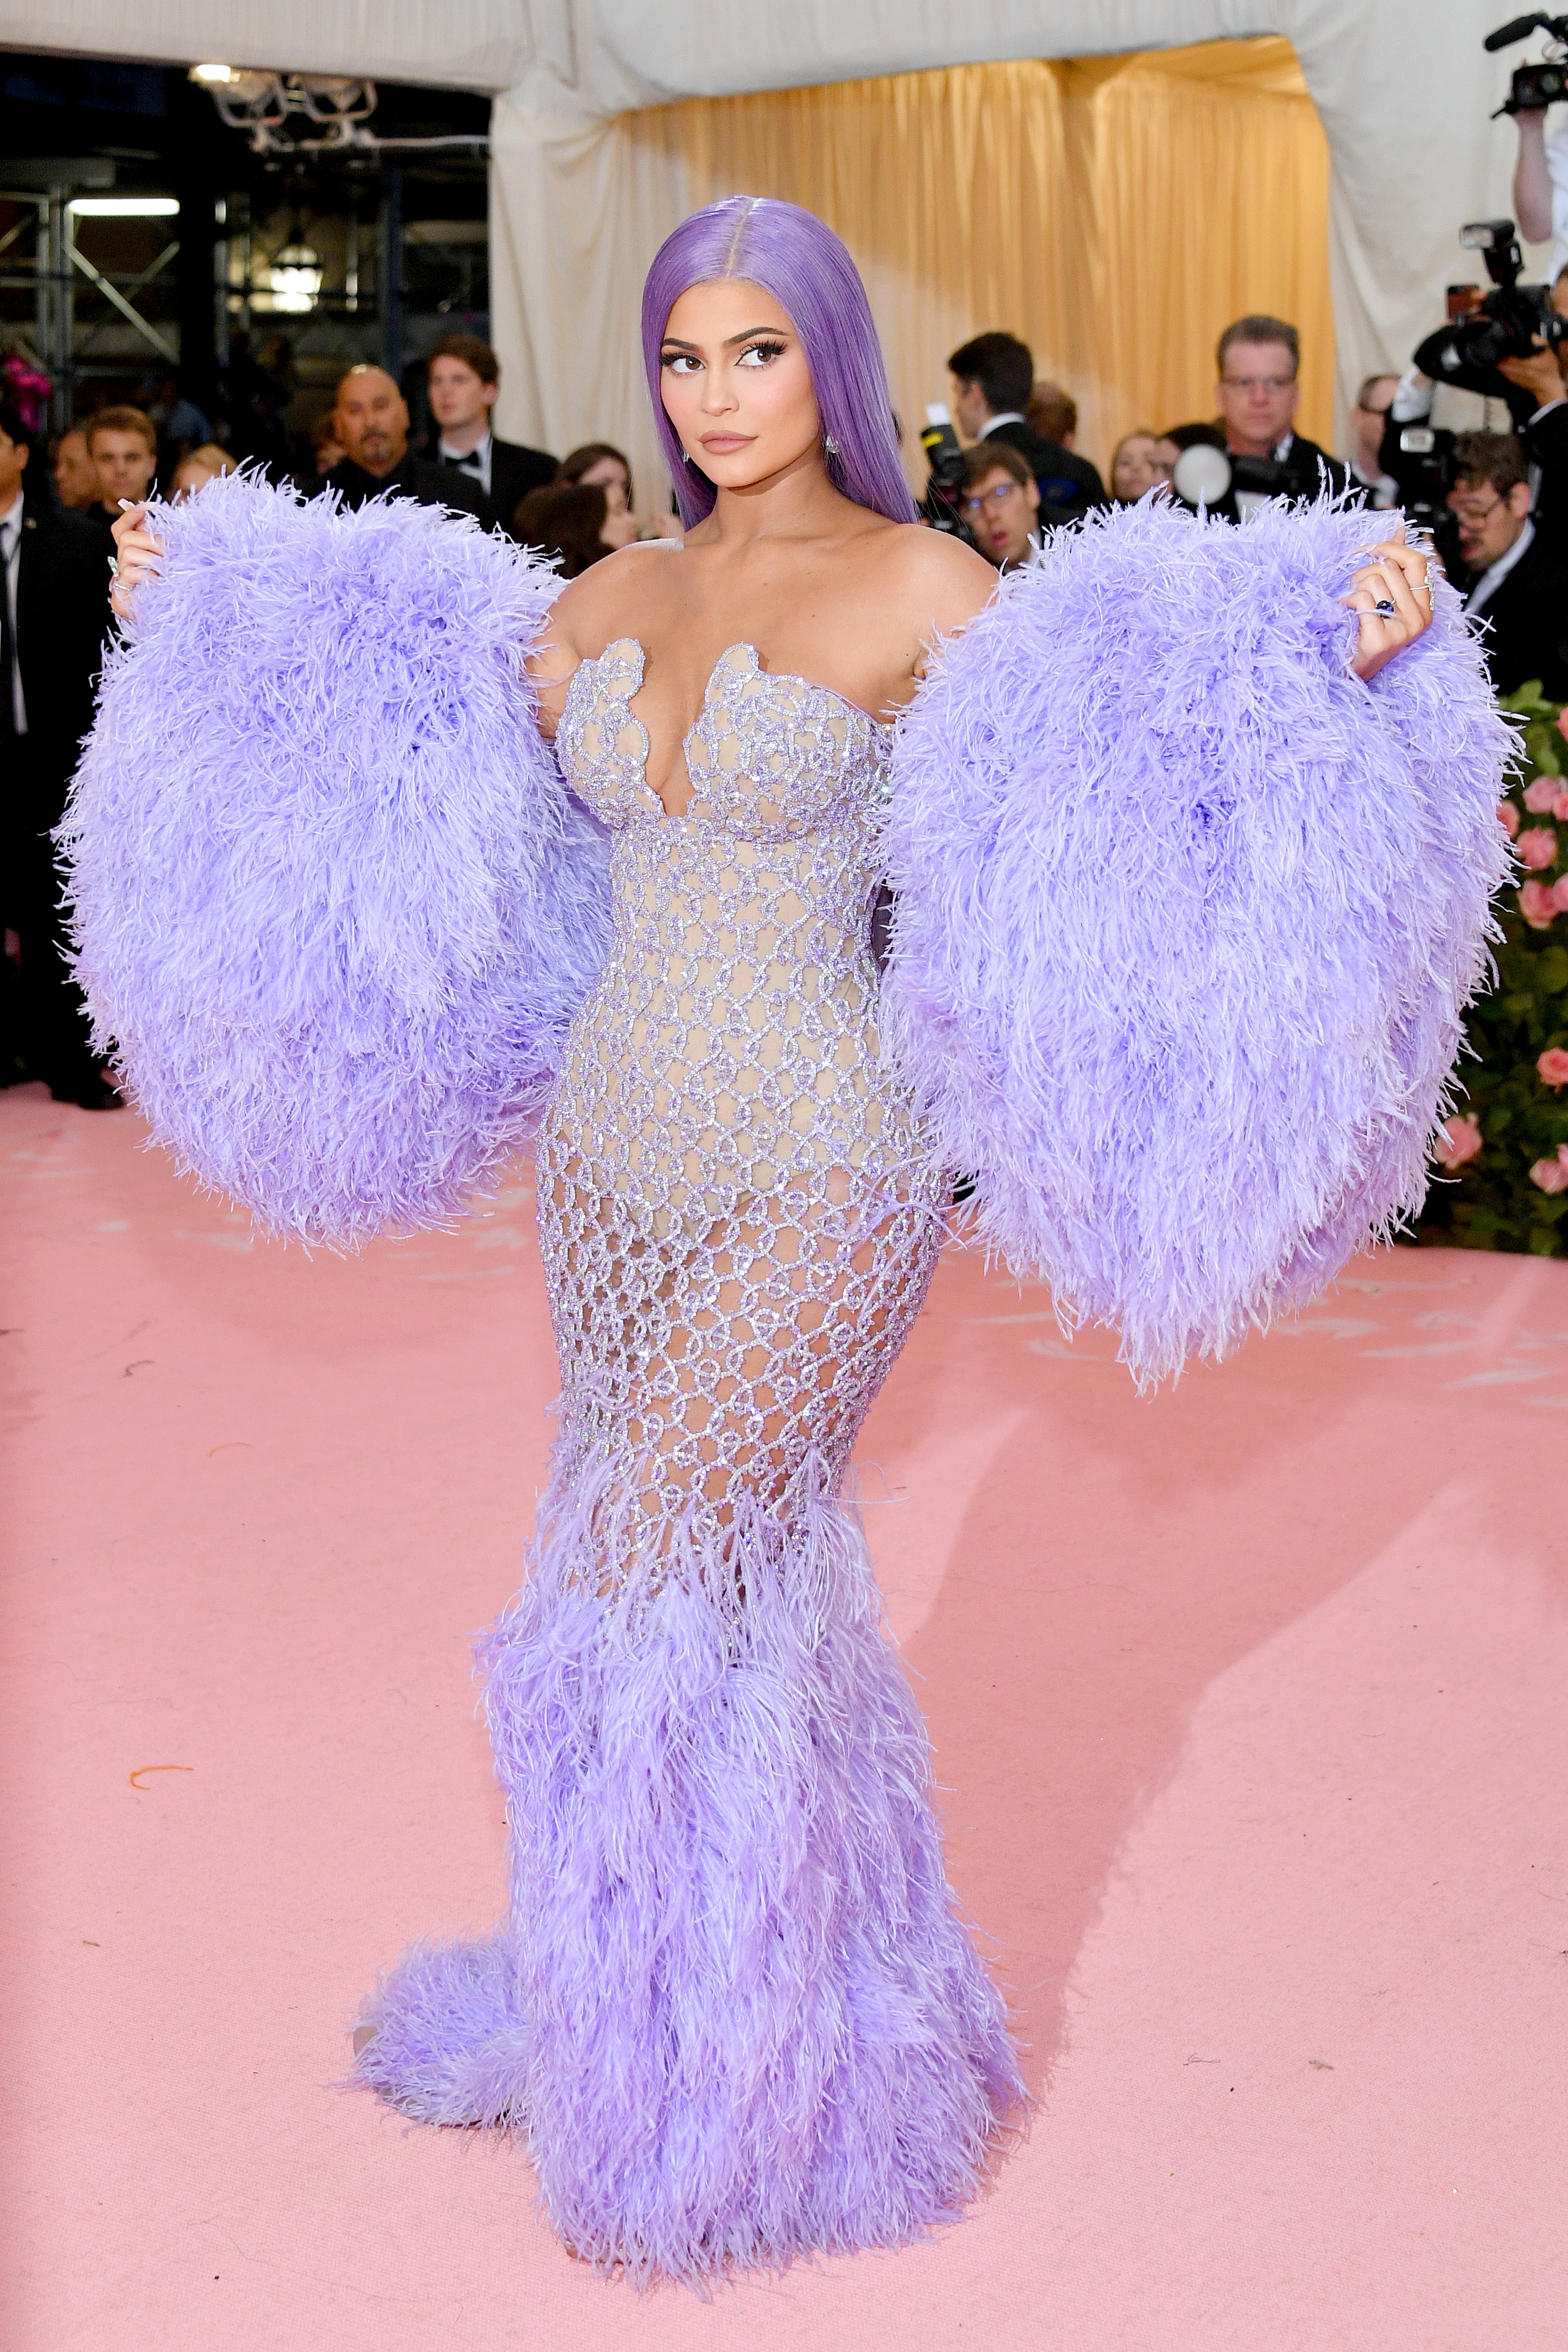 Kylie Jenner's Dress at the 2019 Met Gala